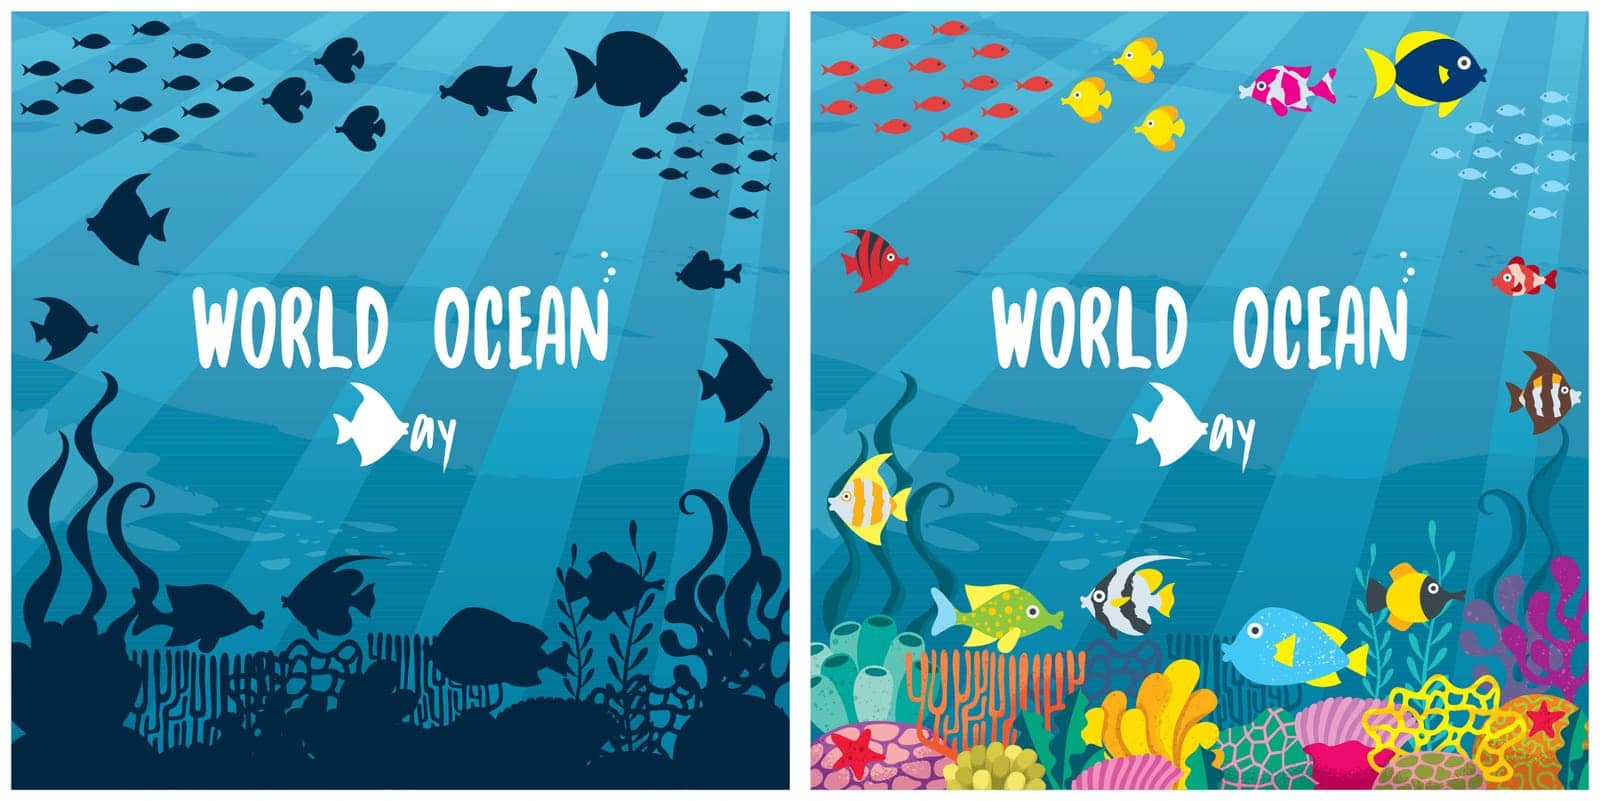 Concept illustration for the world ocean day.